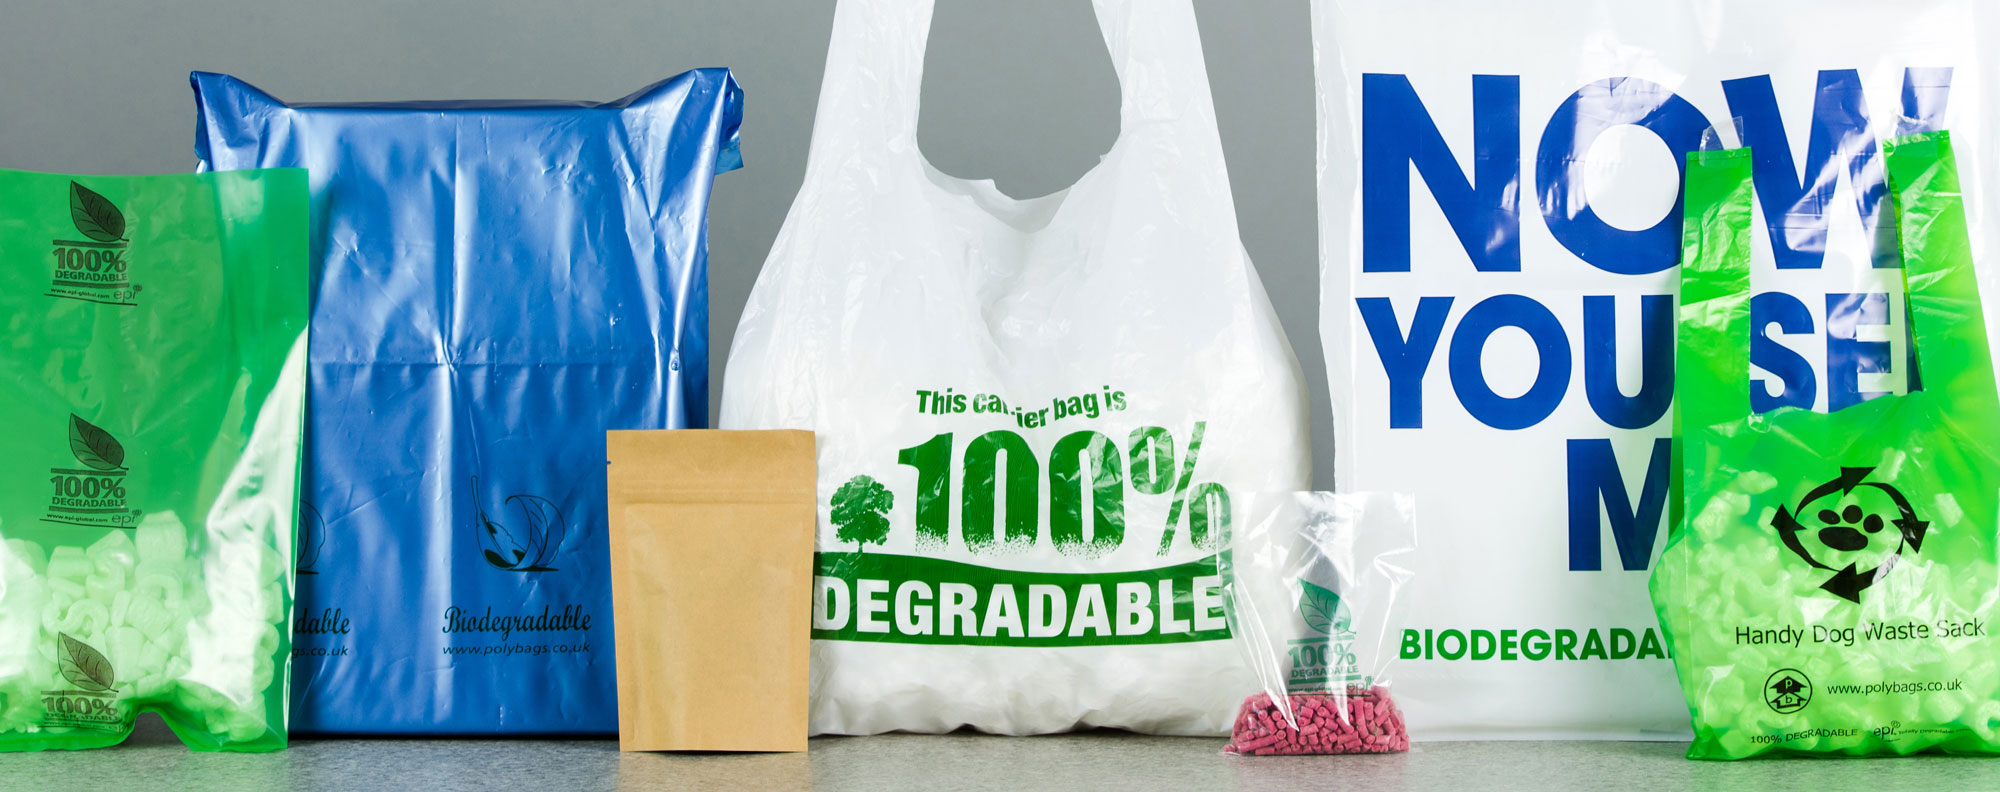 Amazon.com: [500 per box] | Recyclable Compostable Reusable Biodegradable  Plastic T-Shirt Bags | Grocery Shopping Bags | Green Eco Plastic Bags (500  per box) | T-Shirt Carryout Bags 500 count Restaurant Quality,